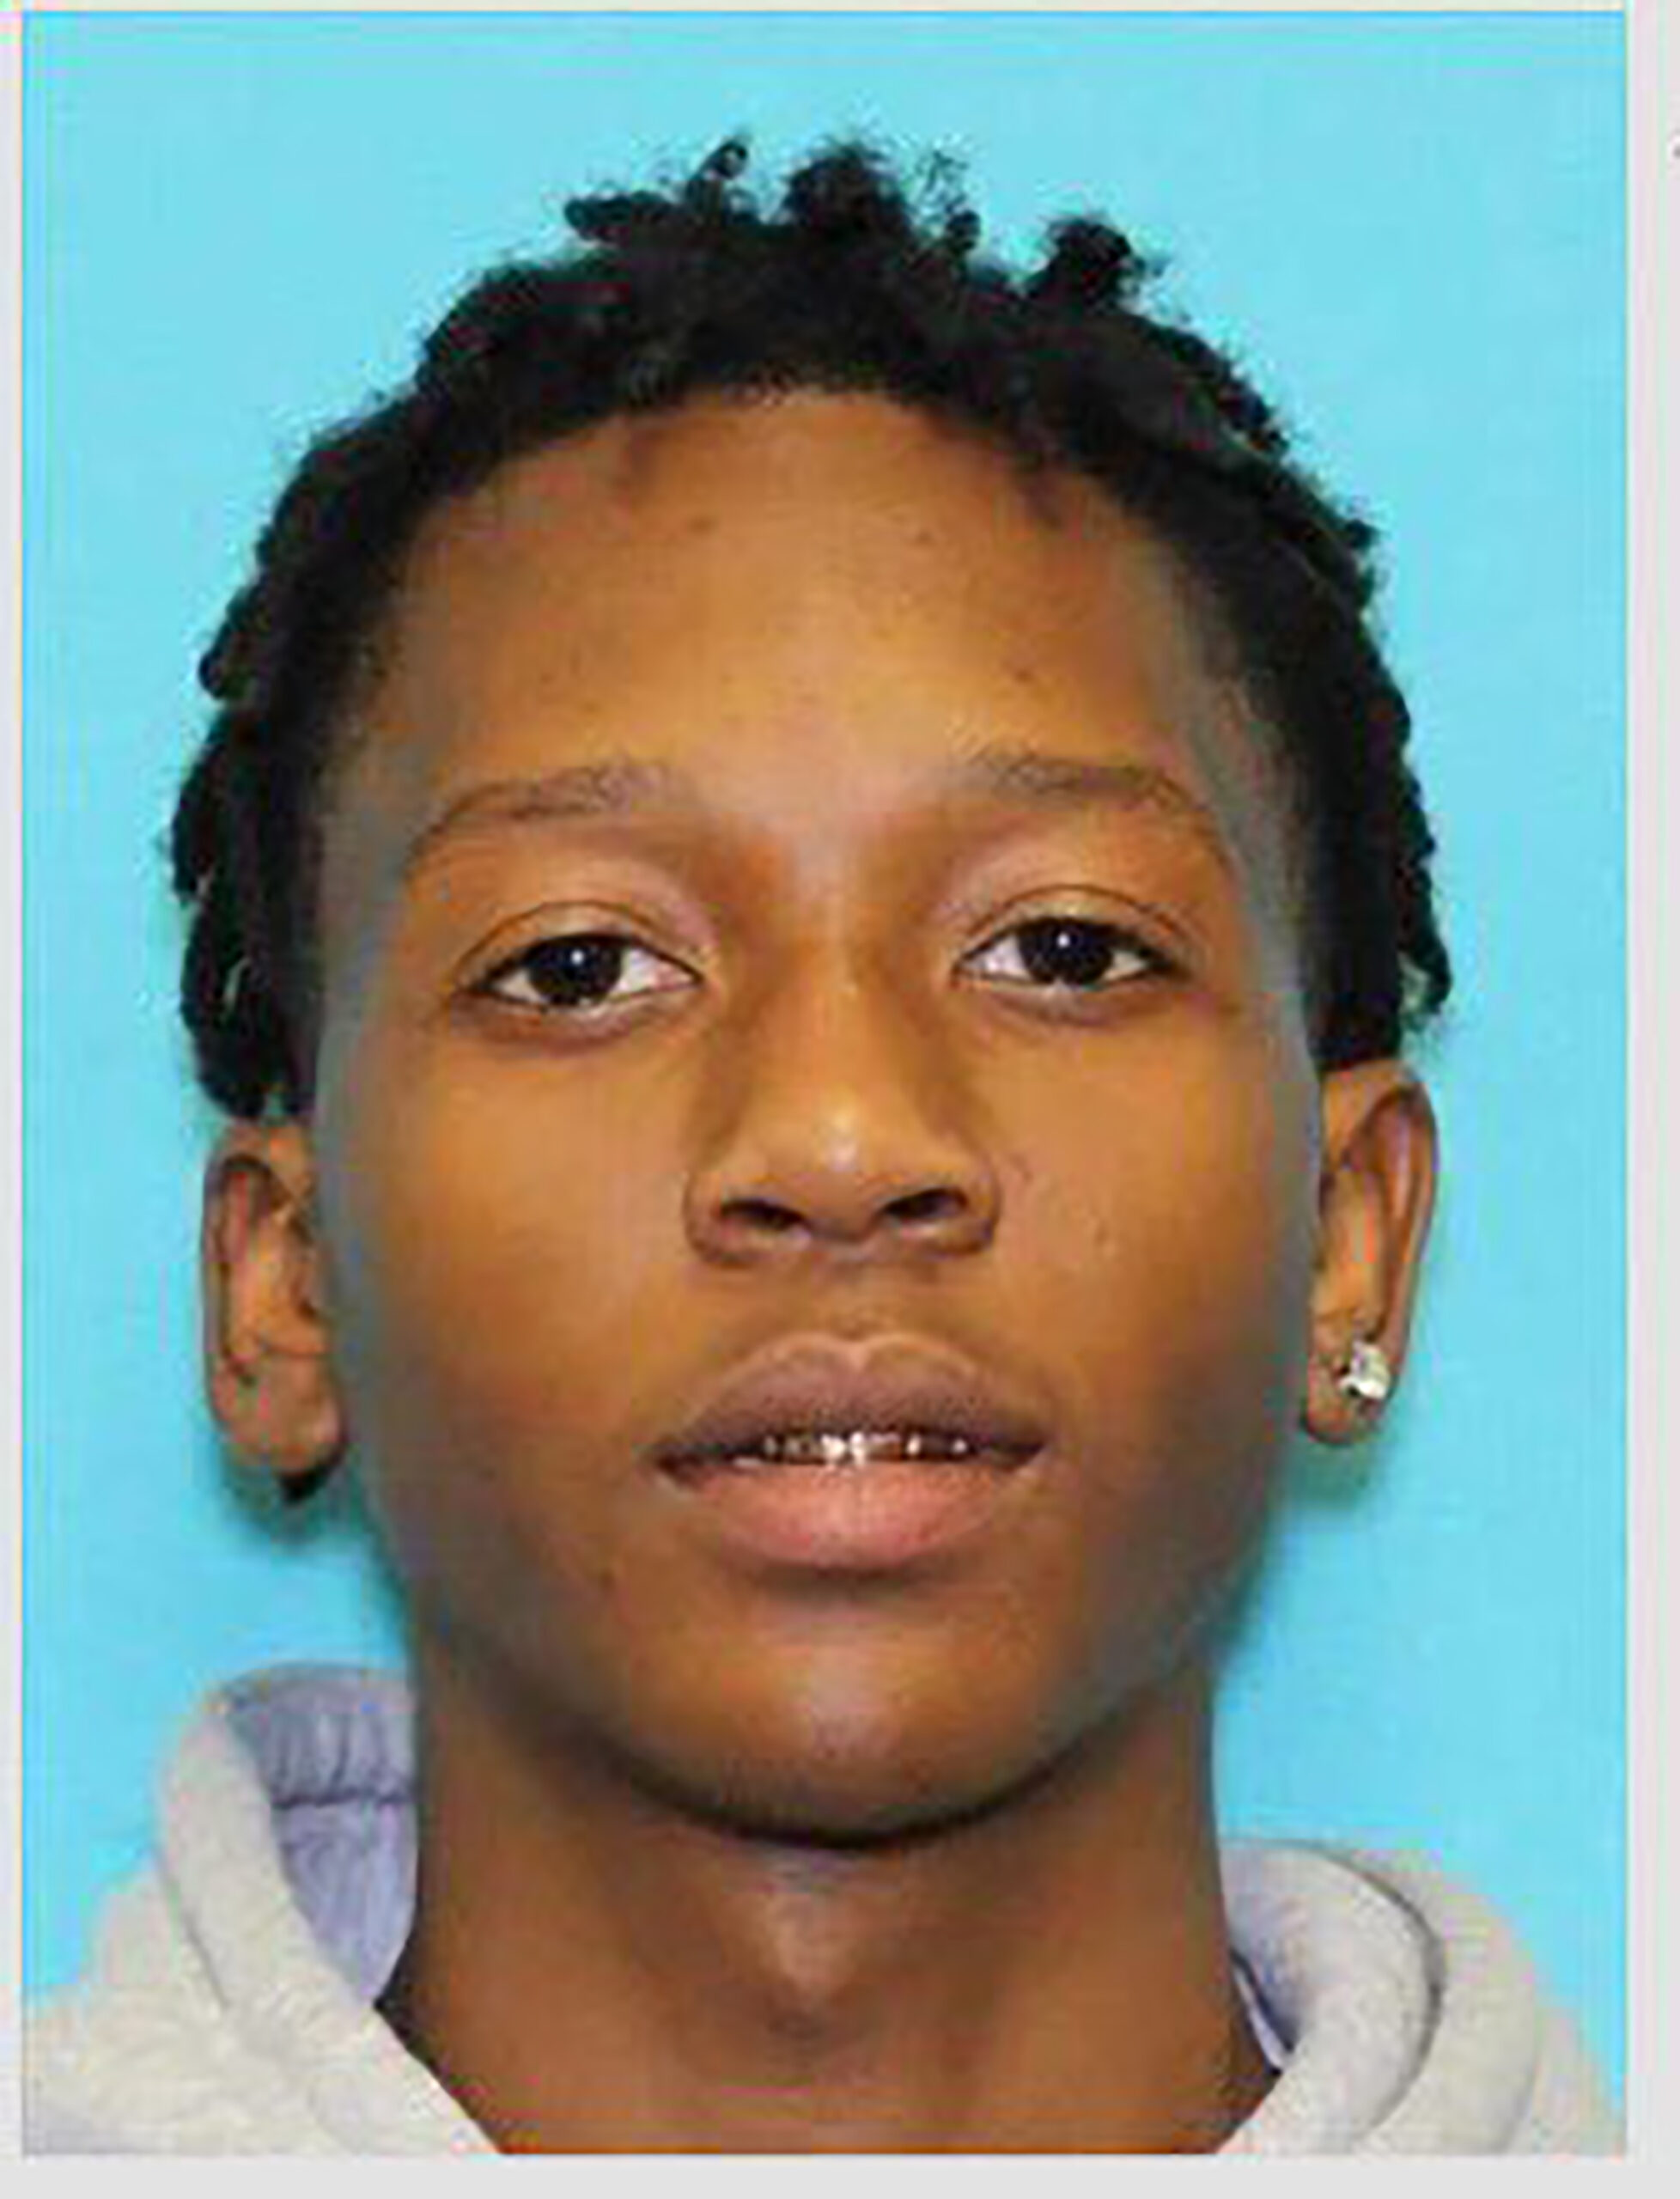 This undated photo provided by the Arlington Police Department in Arlington, Texas shows Timothy George Simpkins. Police are searching for Simpkins, who is the suspected shooter at a Dallas-area high school, leaving four people injured before fleeing, authorities said Wednesday, Oct. 6, 2021. (Arlington Police Department via AP)